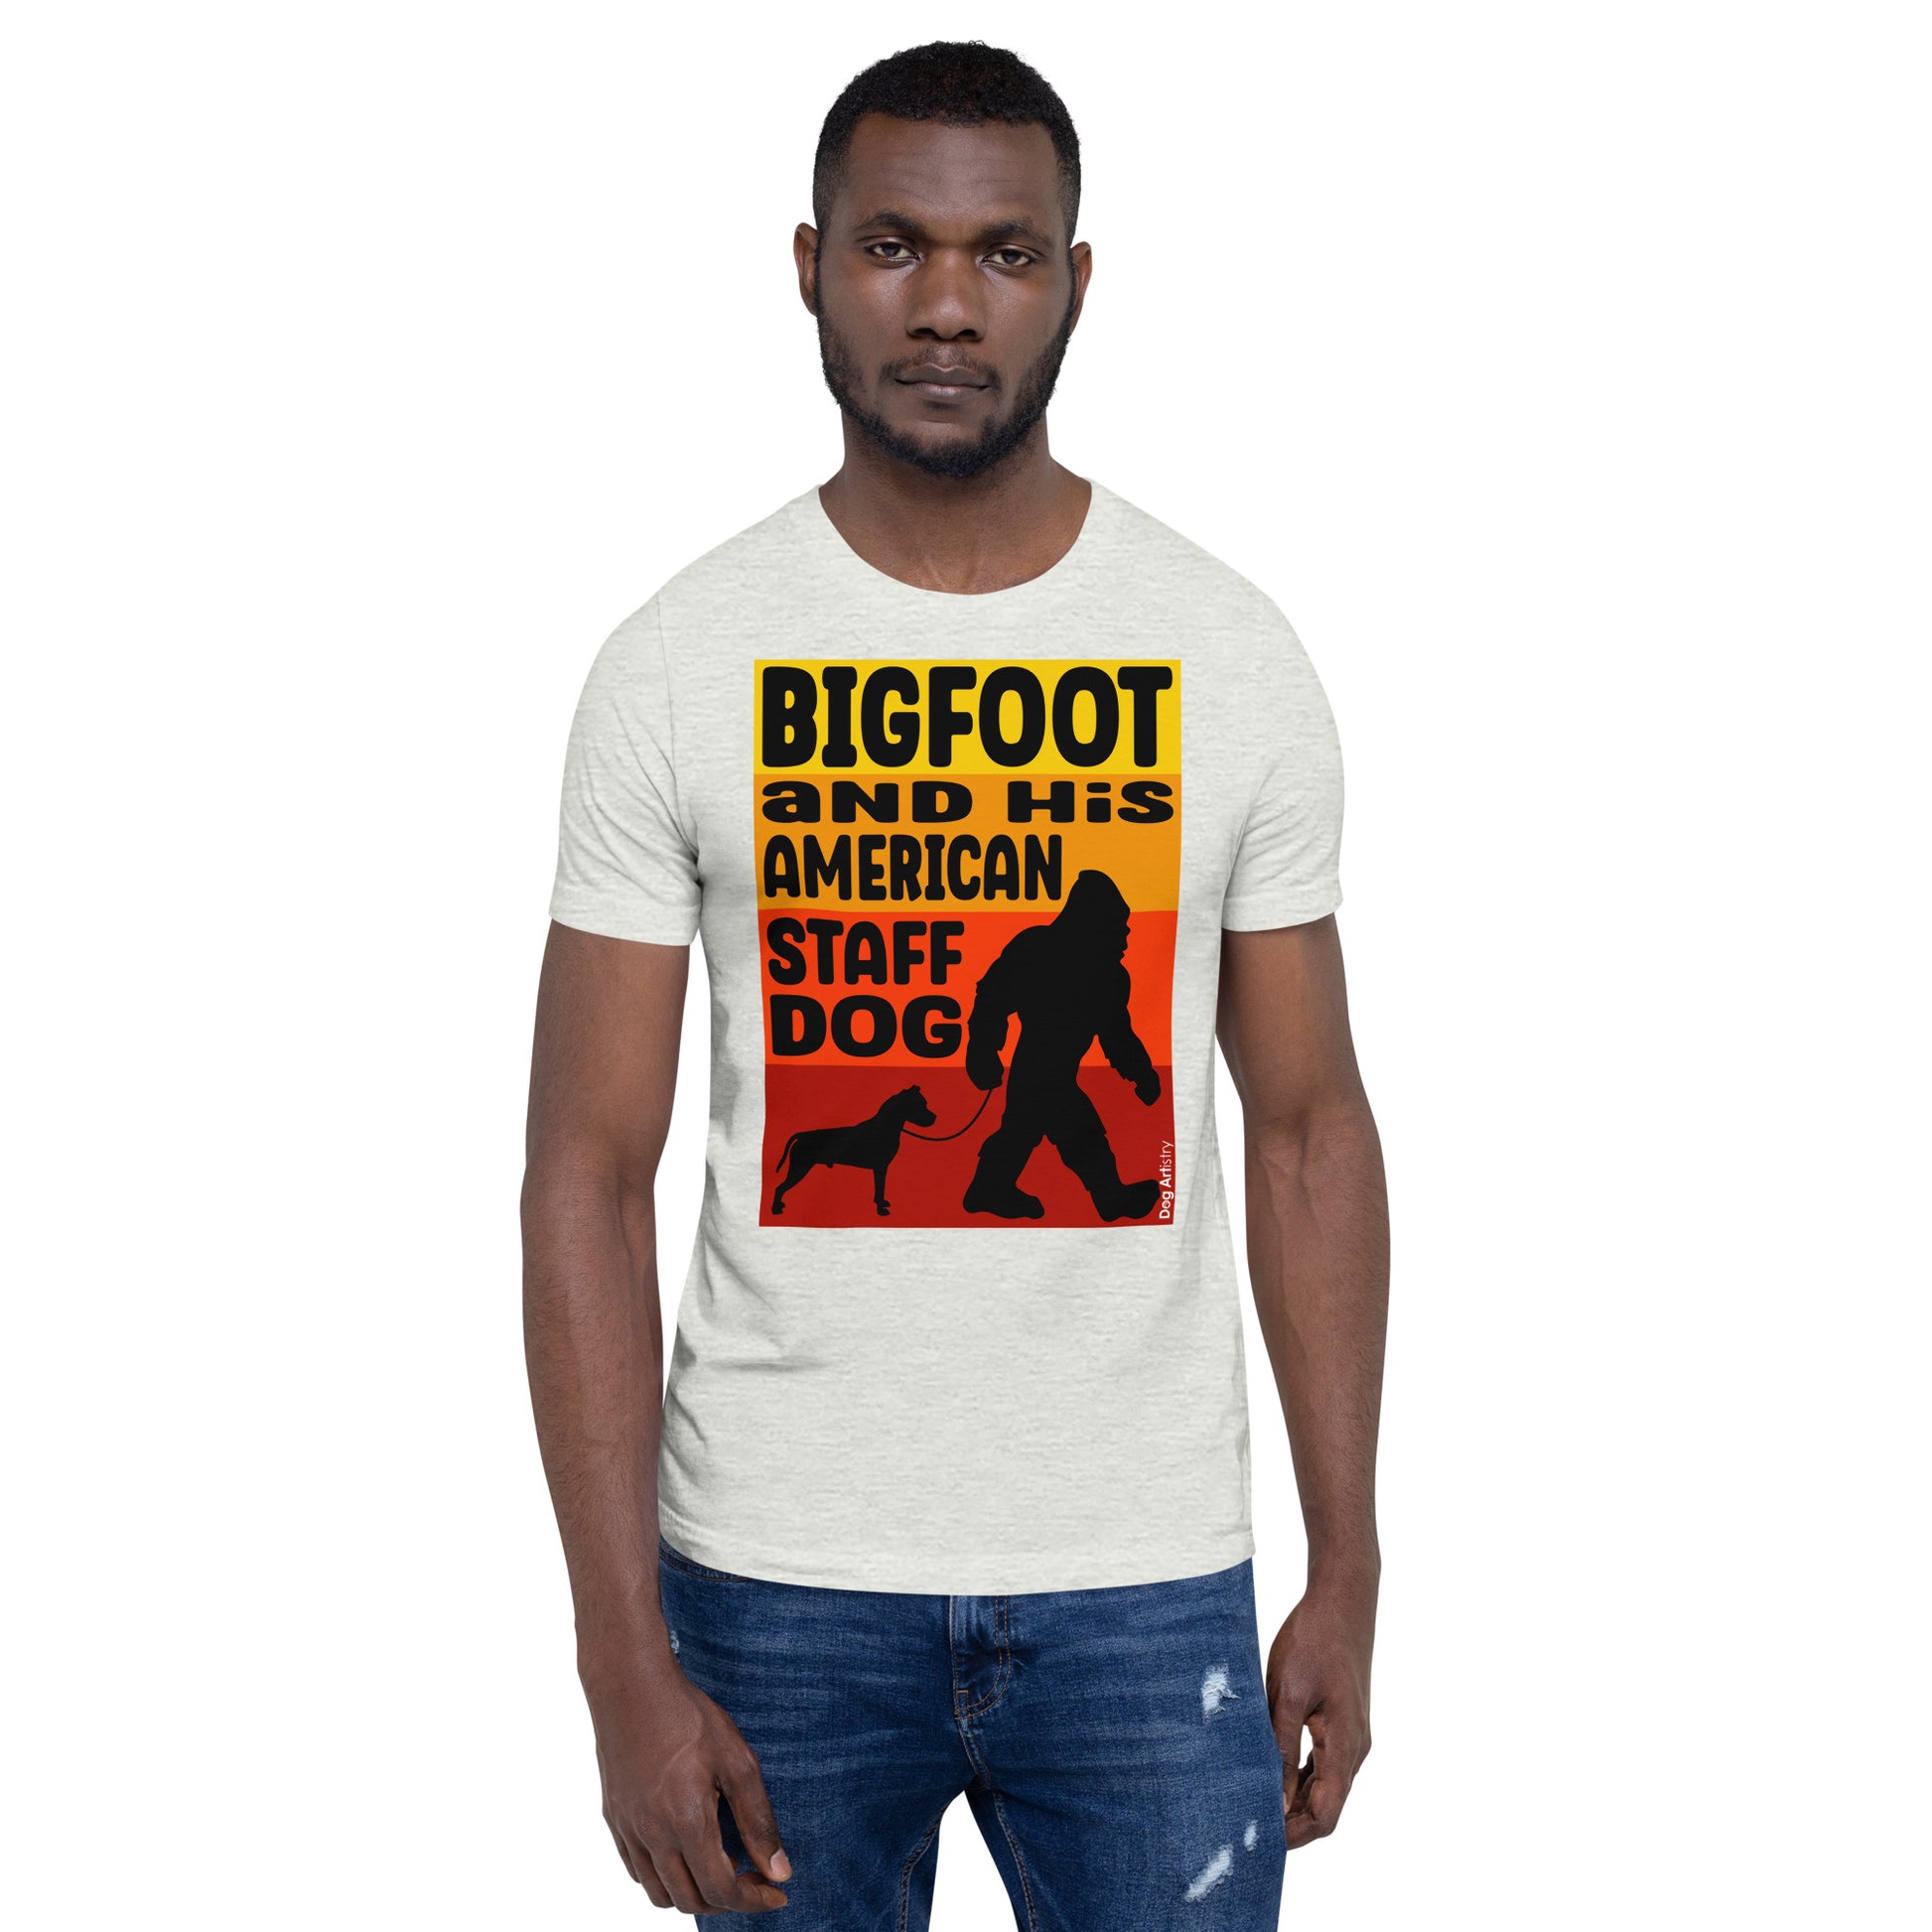 Bigfoot and his American Staffordshire Terrier unisex ash t-shirt-by-Dog-Artistry.